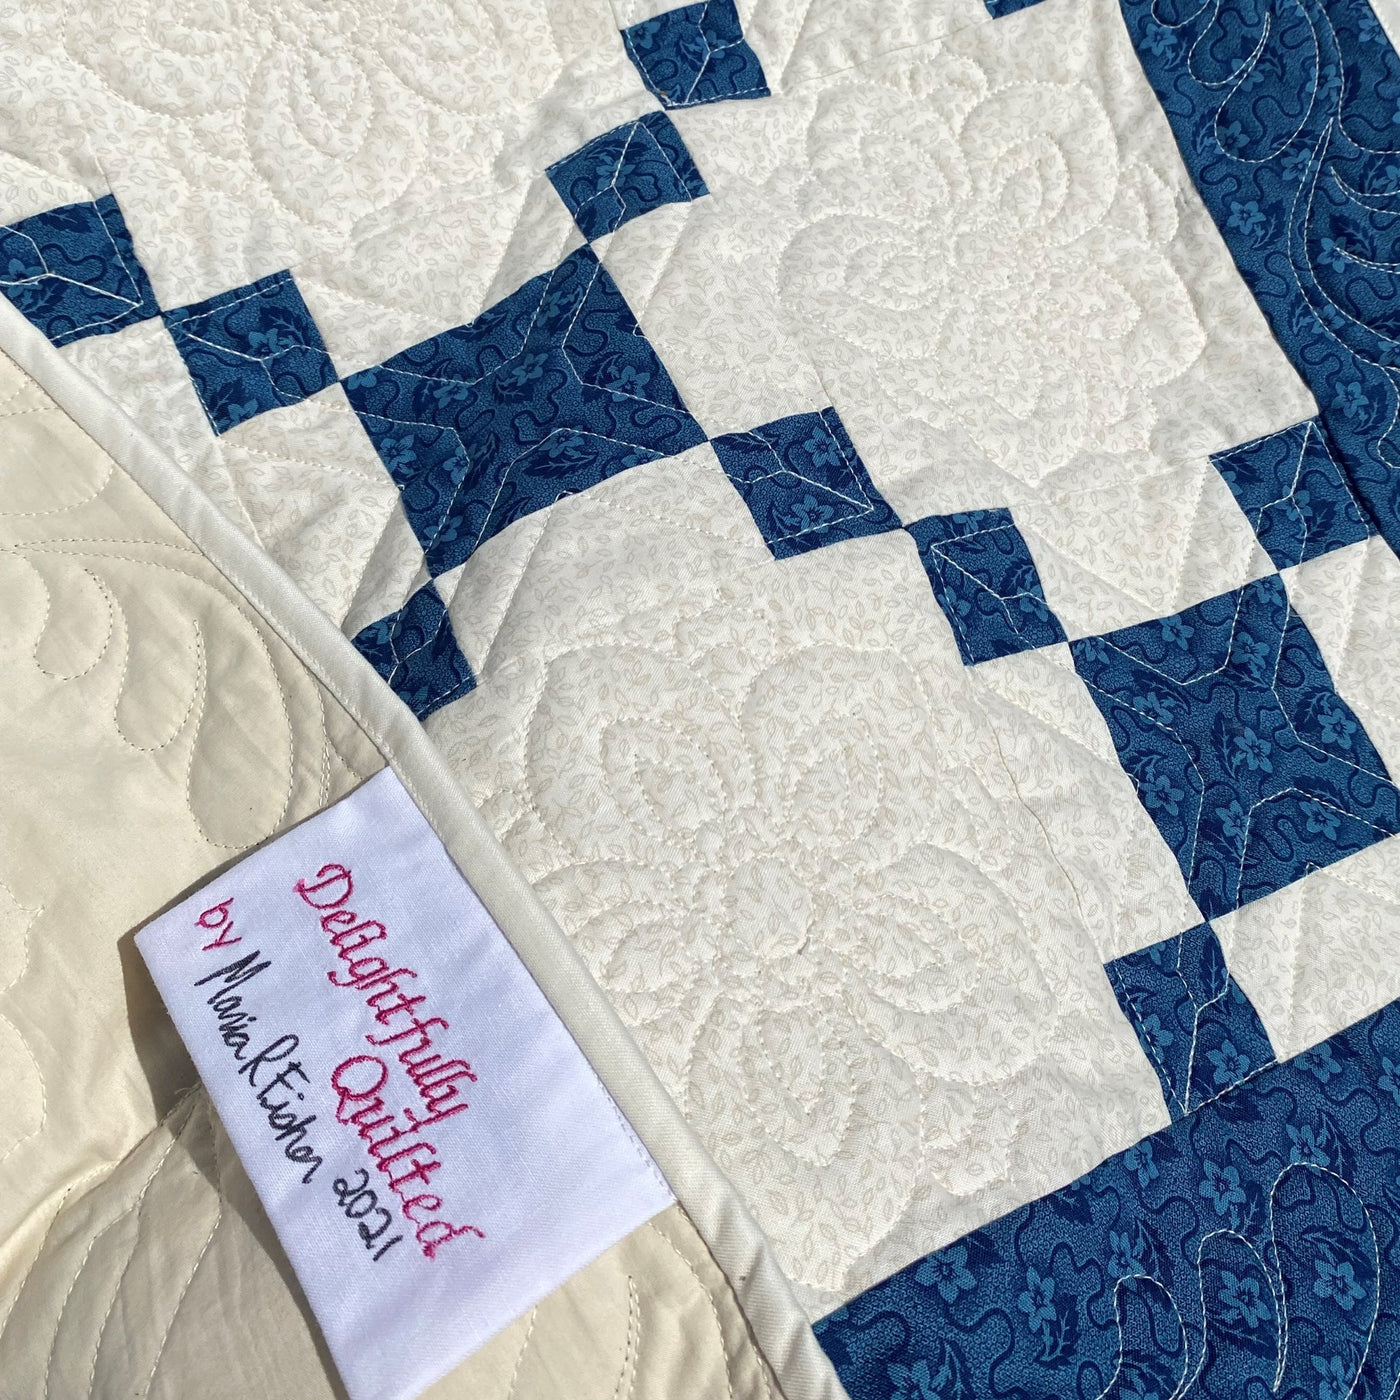  a handmade, heirloom, patchwork of indigo/blue nine patch with white background fabric, natural color backing, 100% cotton batting, Floral top quilting in the white centers, X's in the 9 patch squares, and feathers along the borders, machine top stitched binding, on this baby size quilt